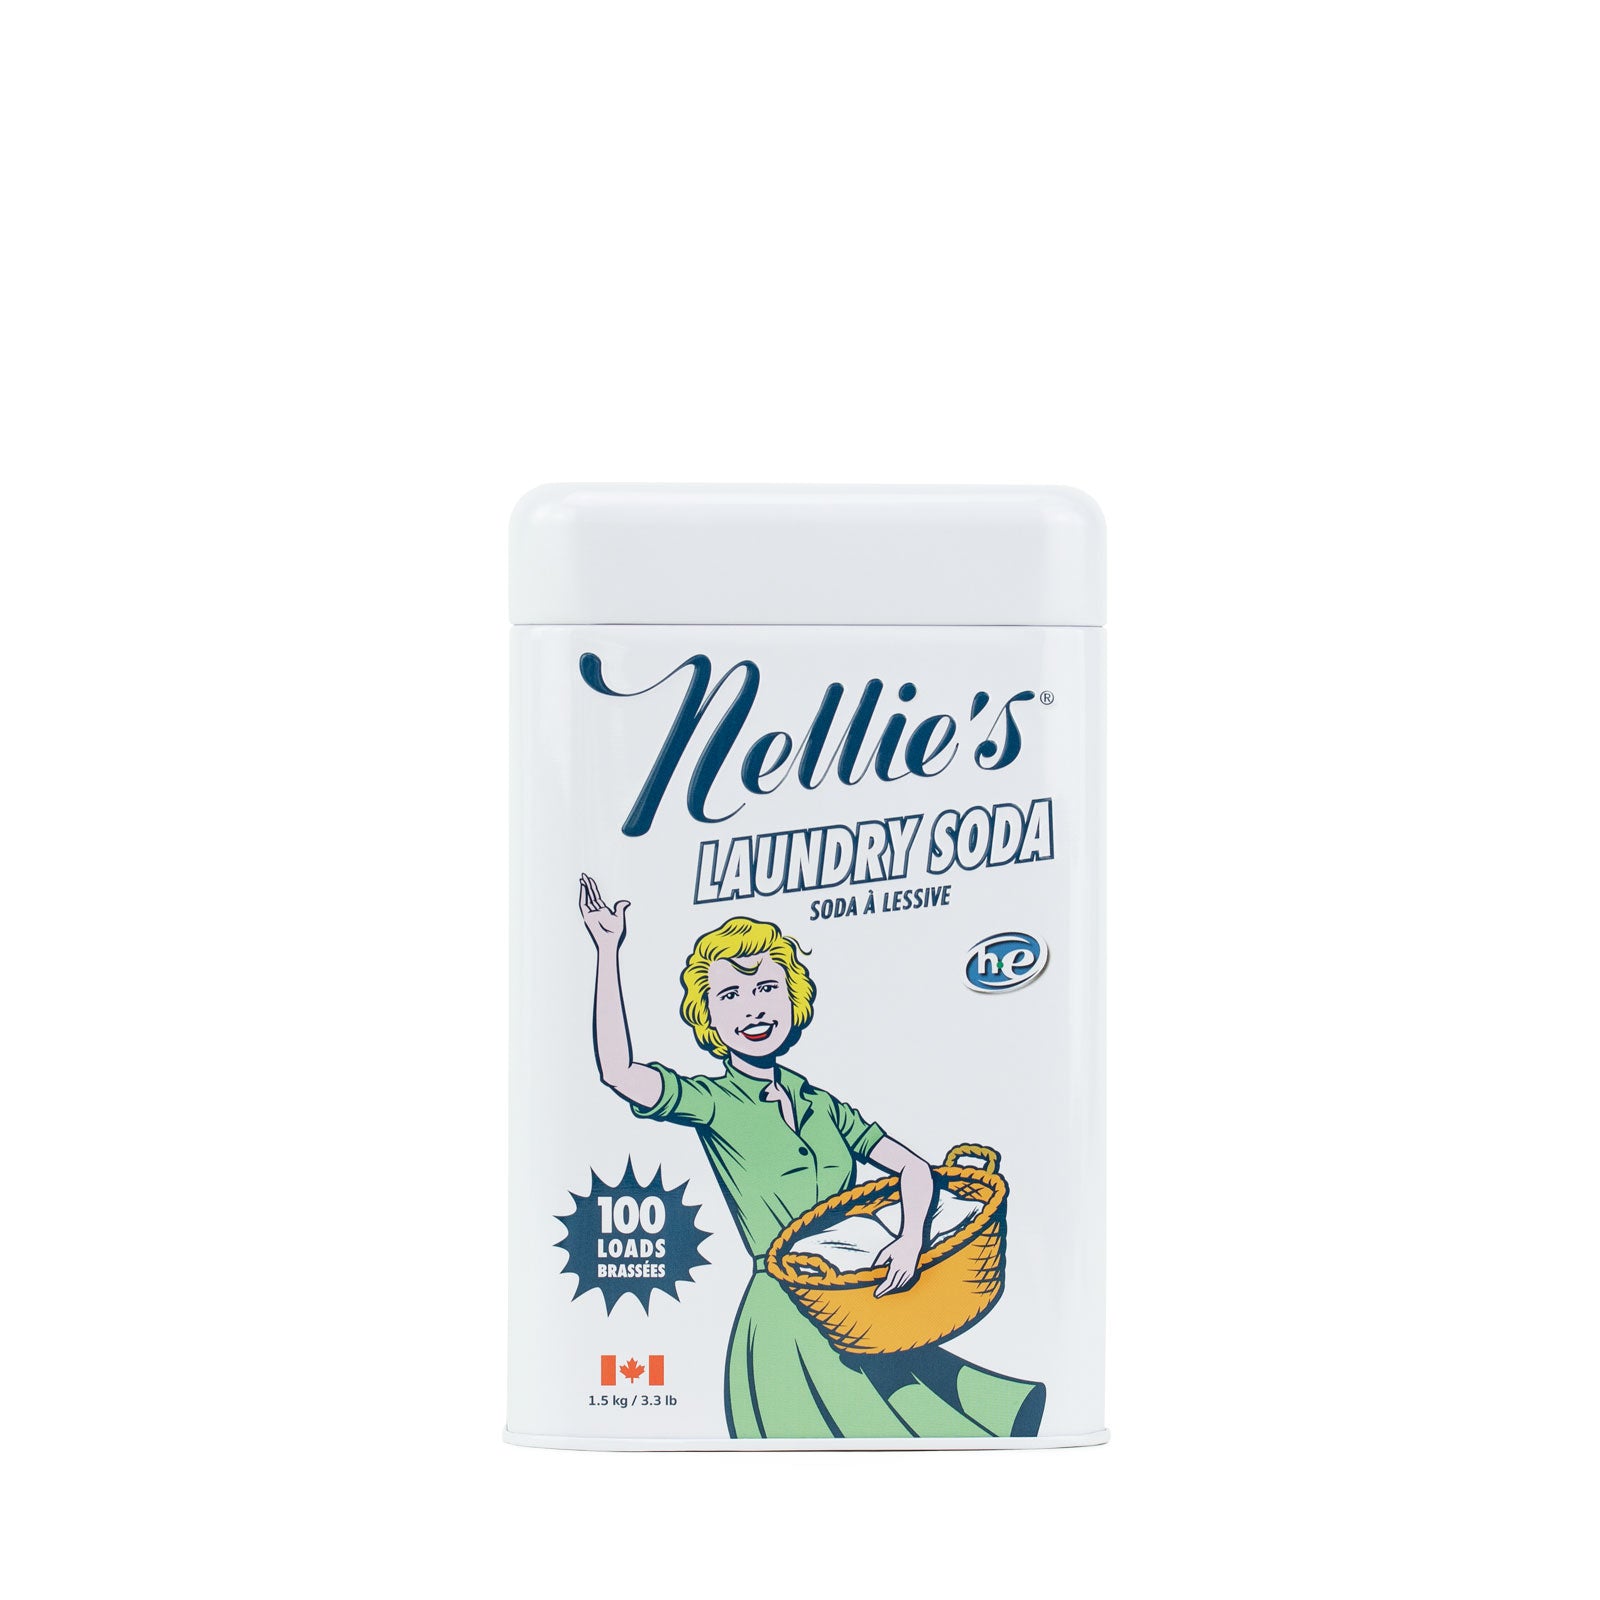 Nellie's All-Natural Laundry Soda 100 Loads 3.3lbs